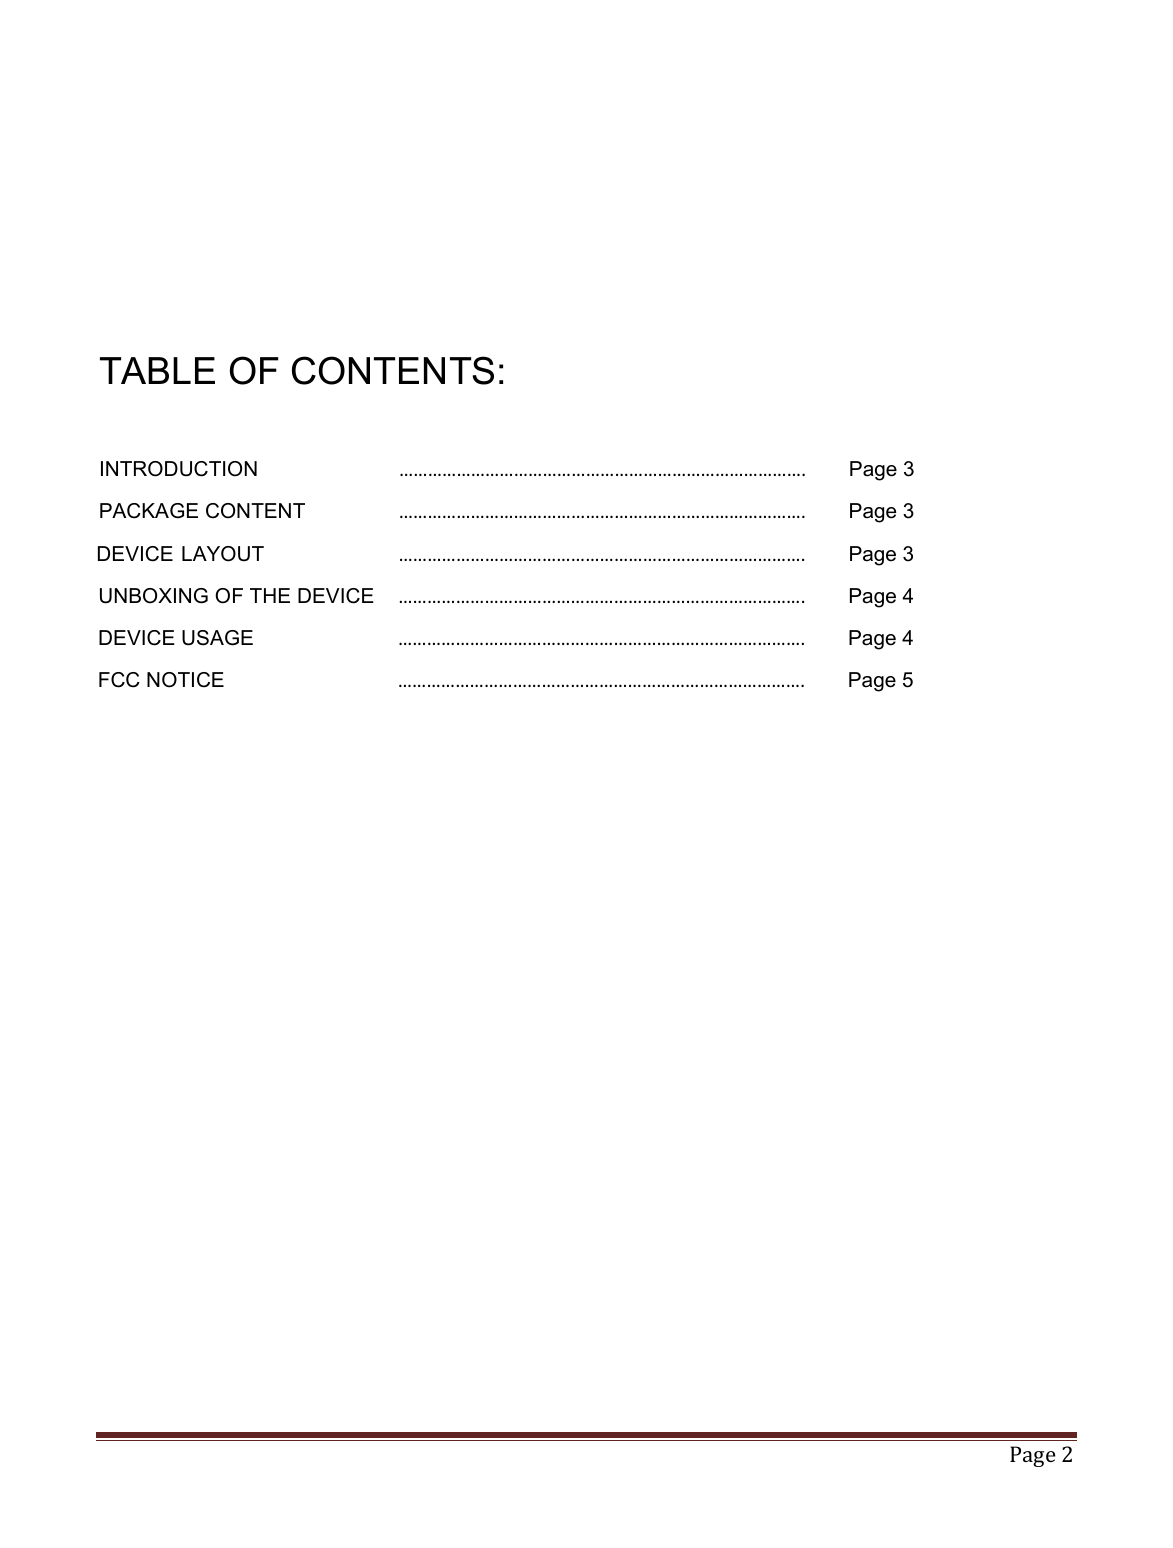   Page 2       TABLE OF CONTENTS:  INTRODUCTION      ………………………………………………………………………….  Page 3 PACKAGE CONTENT    ………………………………………………………………………….  Page 3   DEVICE LAYOUT      ………………………………………………………………………….  Page 3 UNBOXING OF THE DEVICE  ………………………………………………………………………….  Page 4 DEVICE USAGE      ………………………………………………………………………….  Page 4 FCC NOTICE      ………………………………………………………………………….  Page 5             